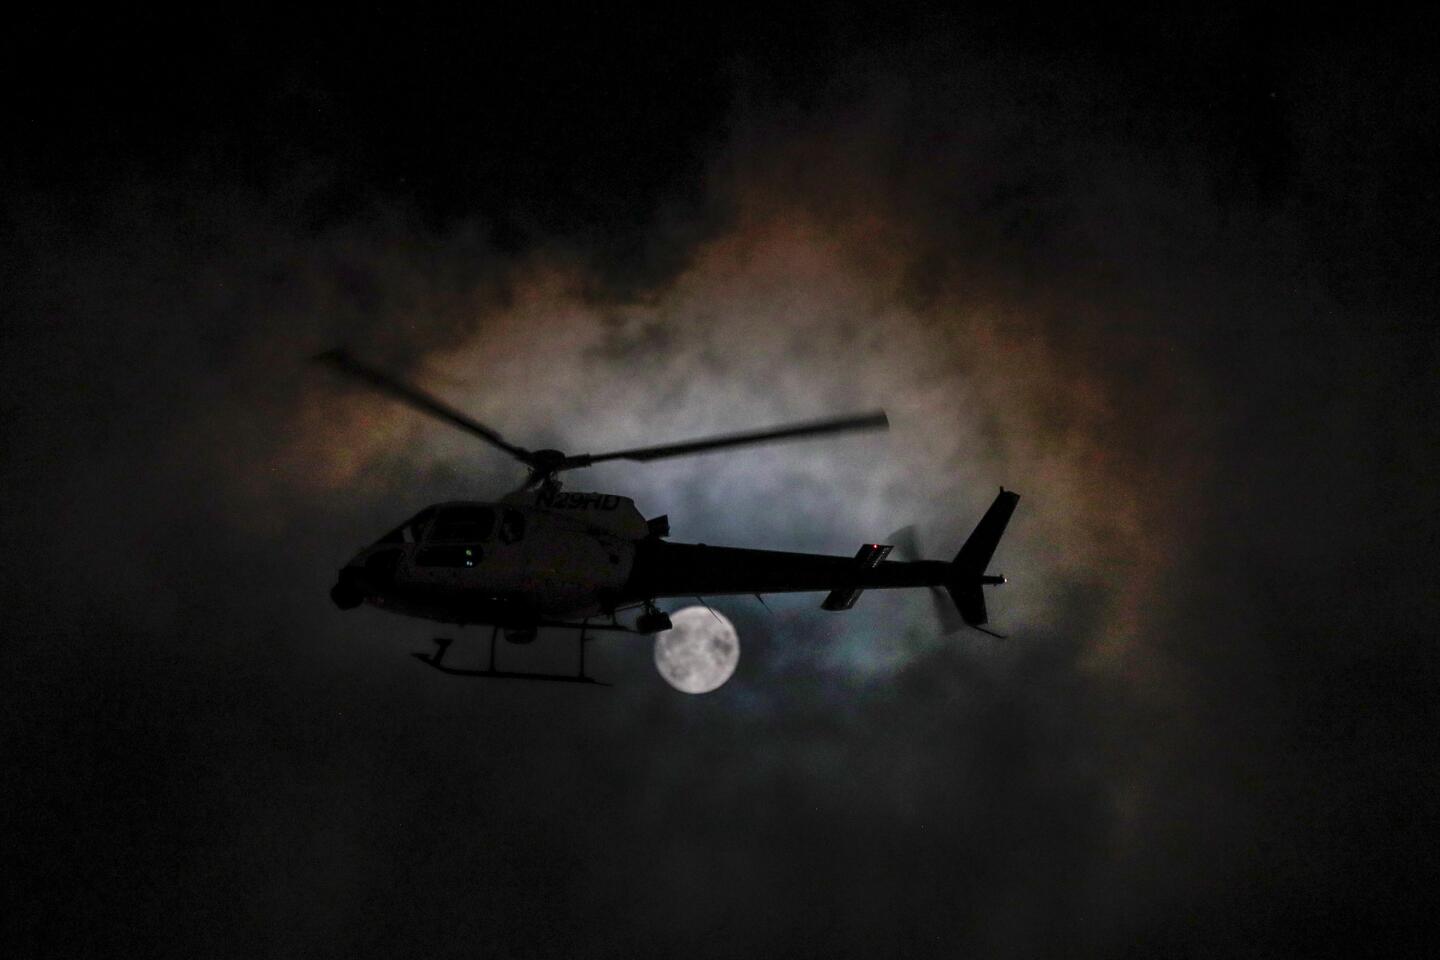 A helicopter circles above Budlong Avenue during Monday night's protest.